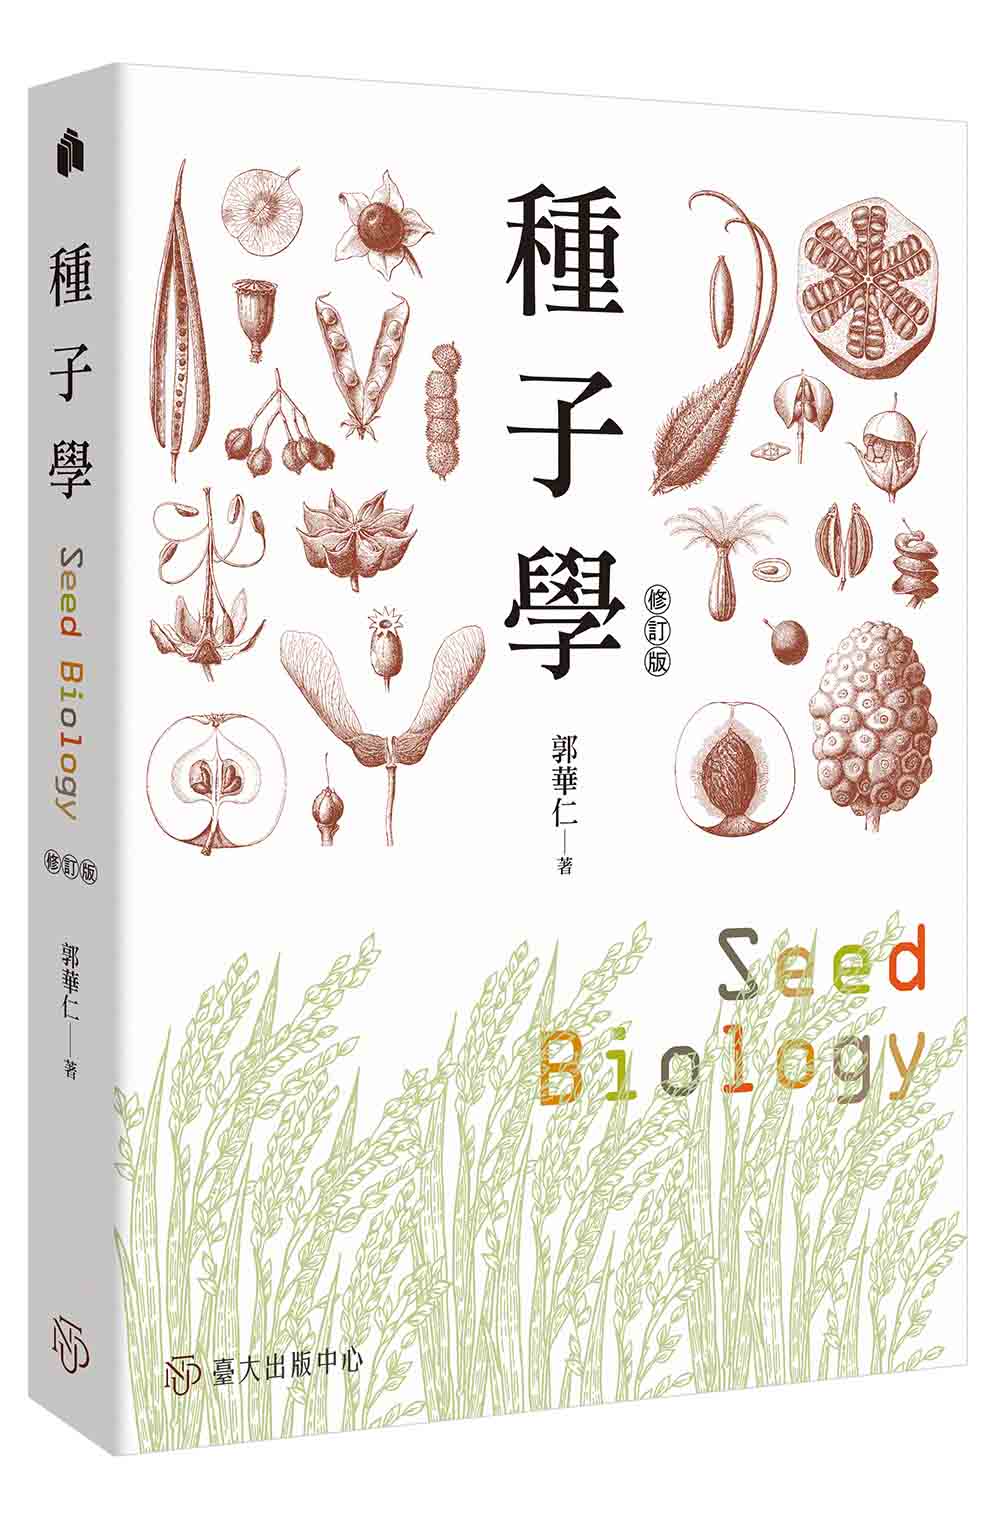 Seed Biology (Revised Edition)